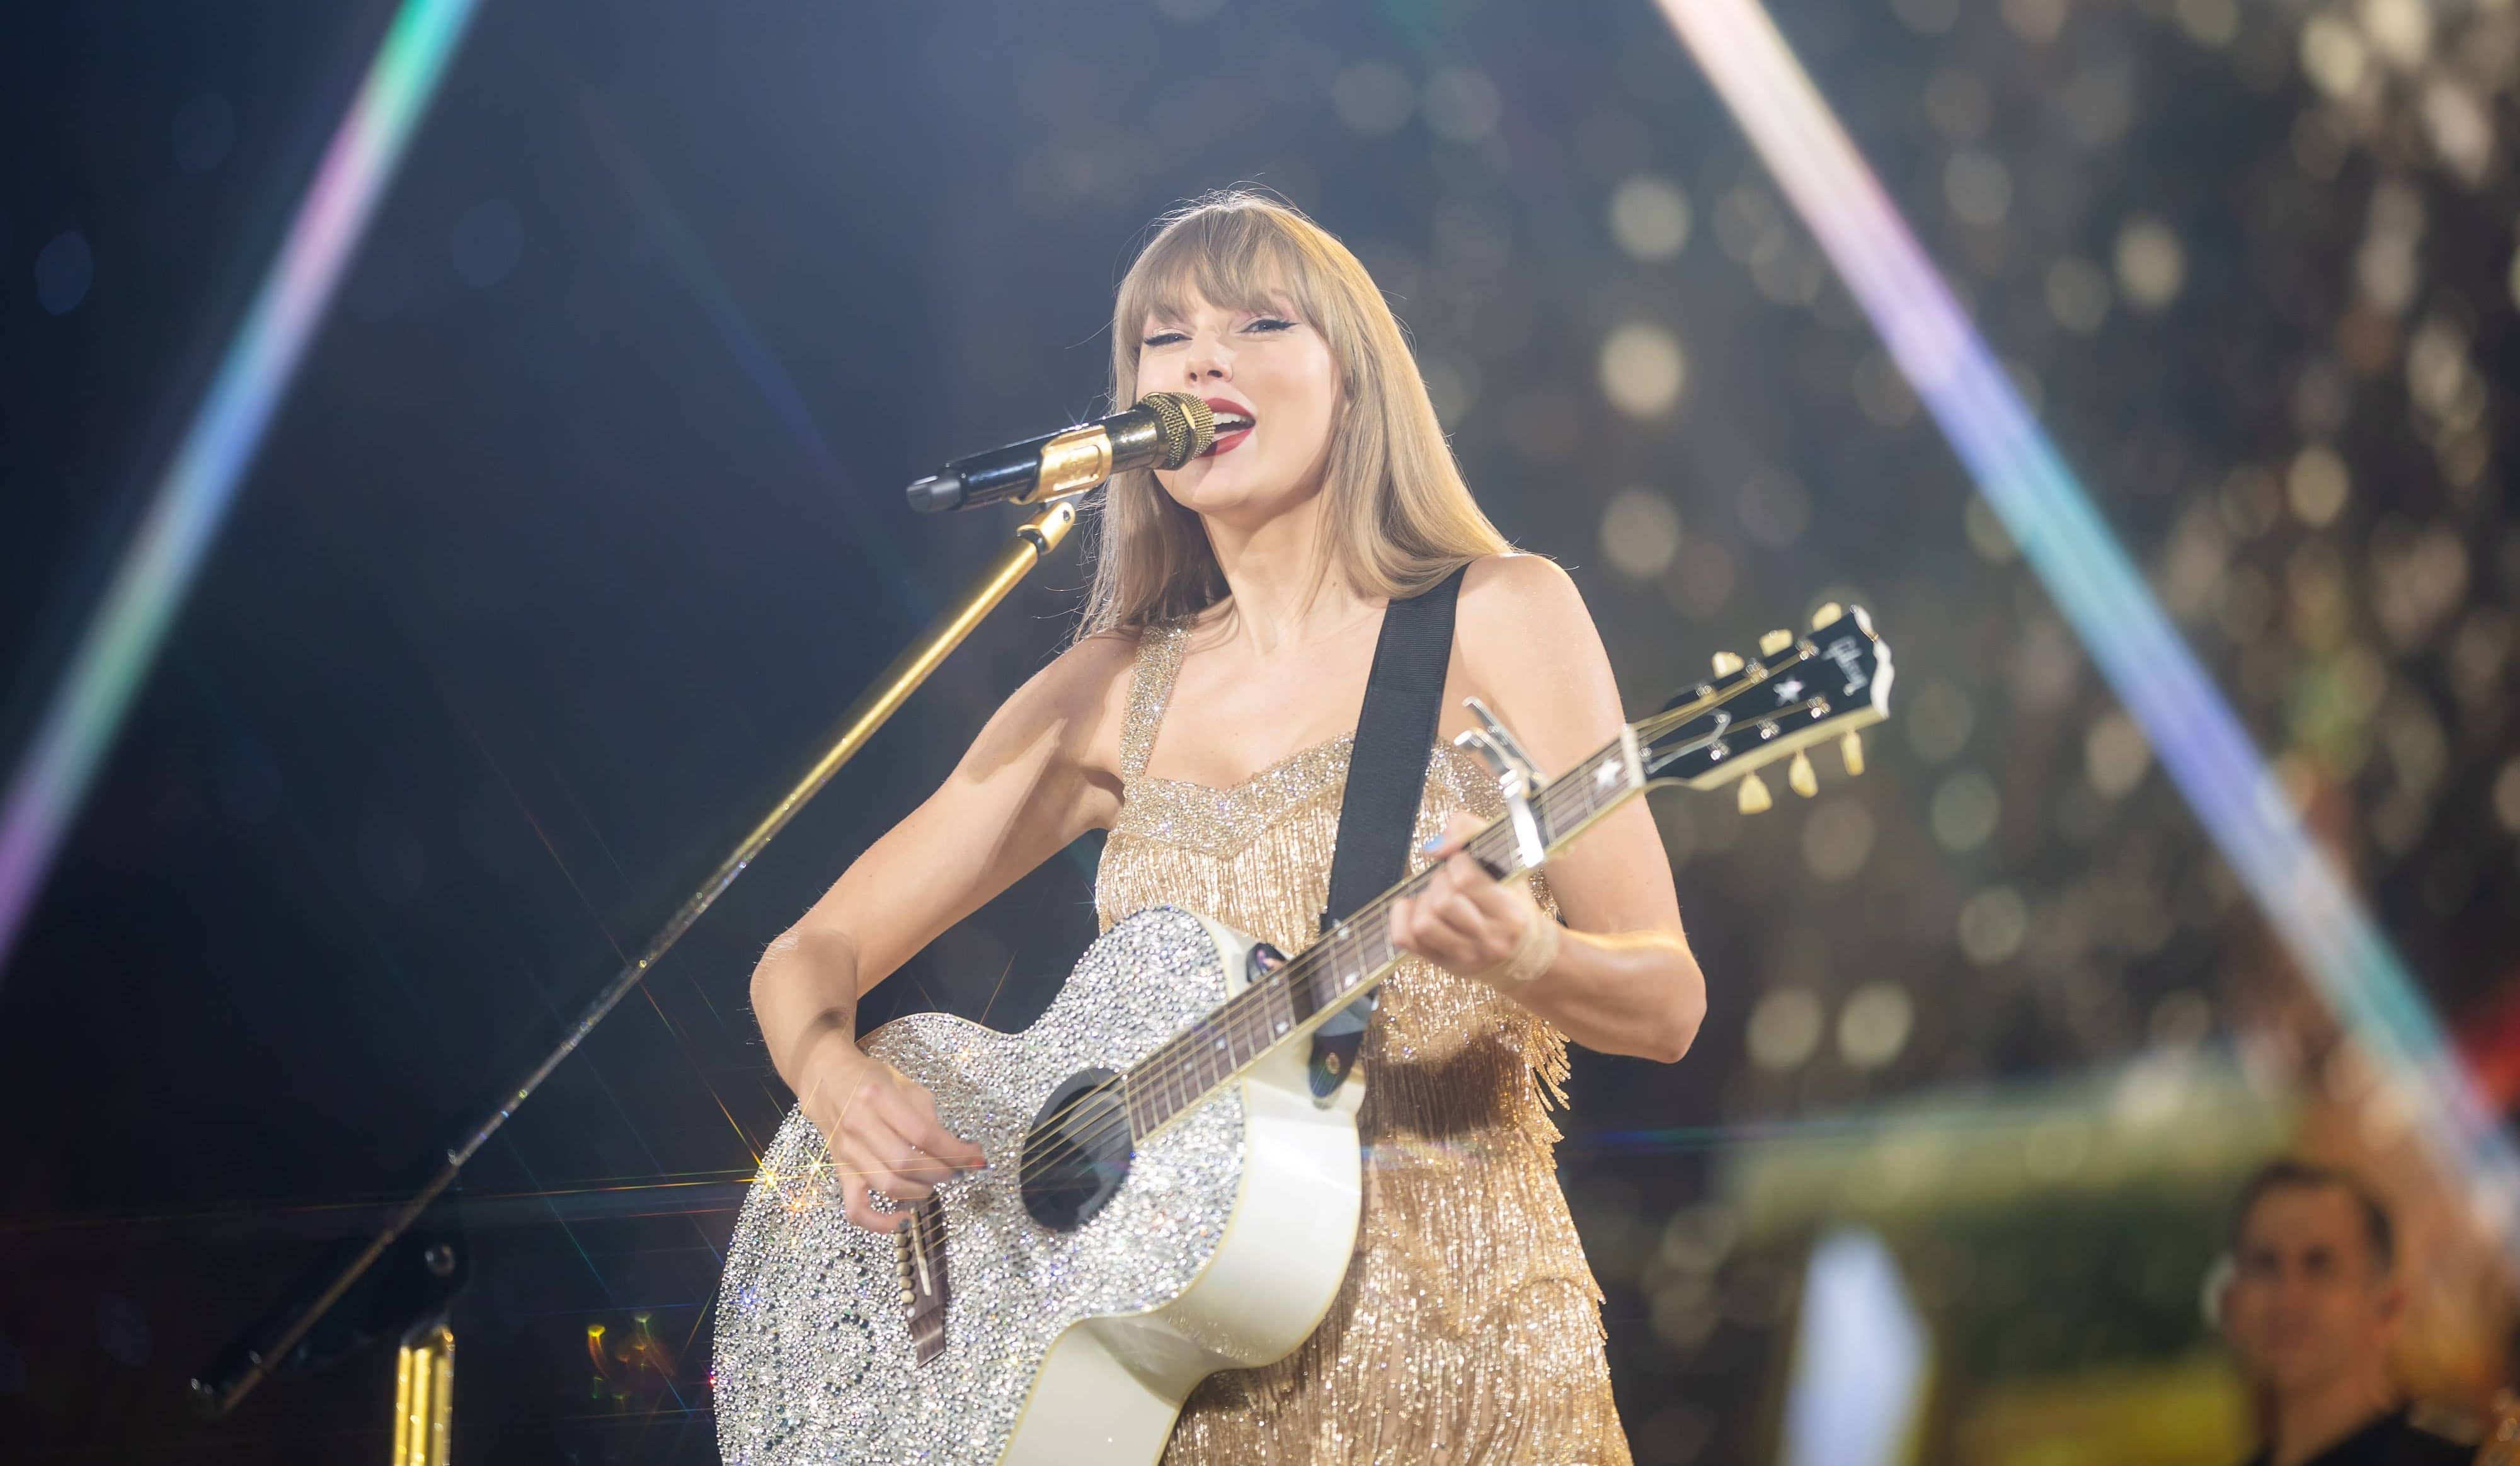 How to find Taylor Swift's '1989' vault song list on Google